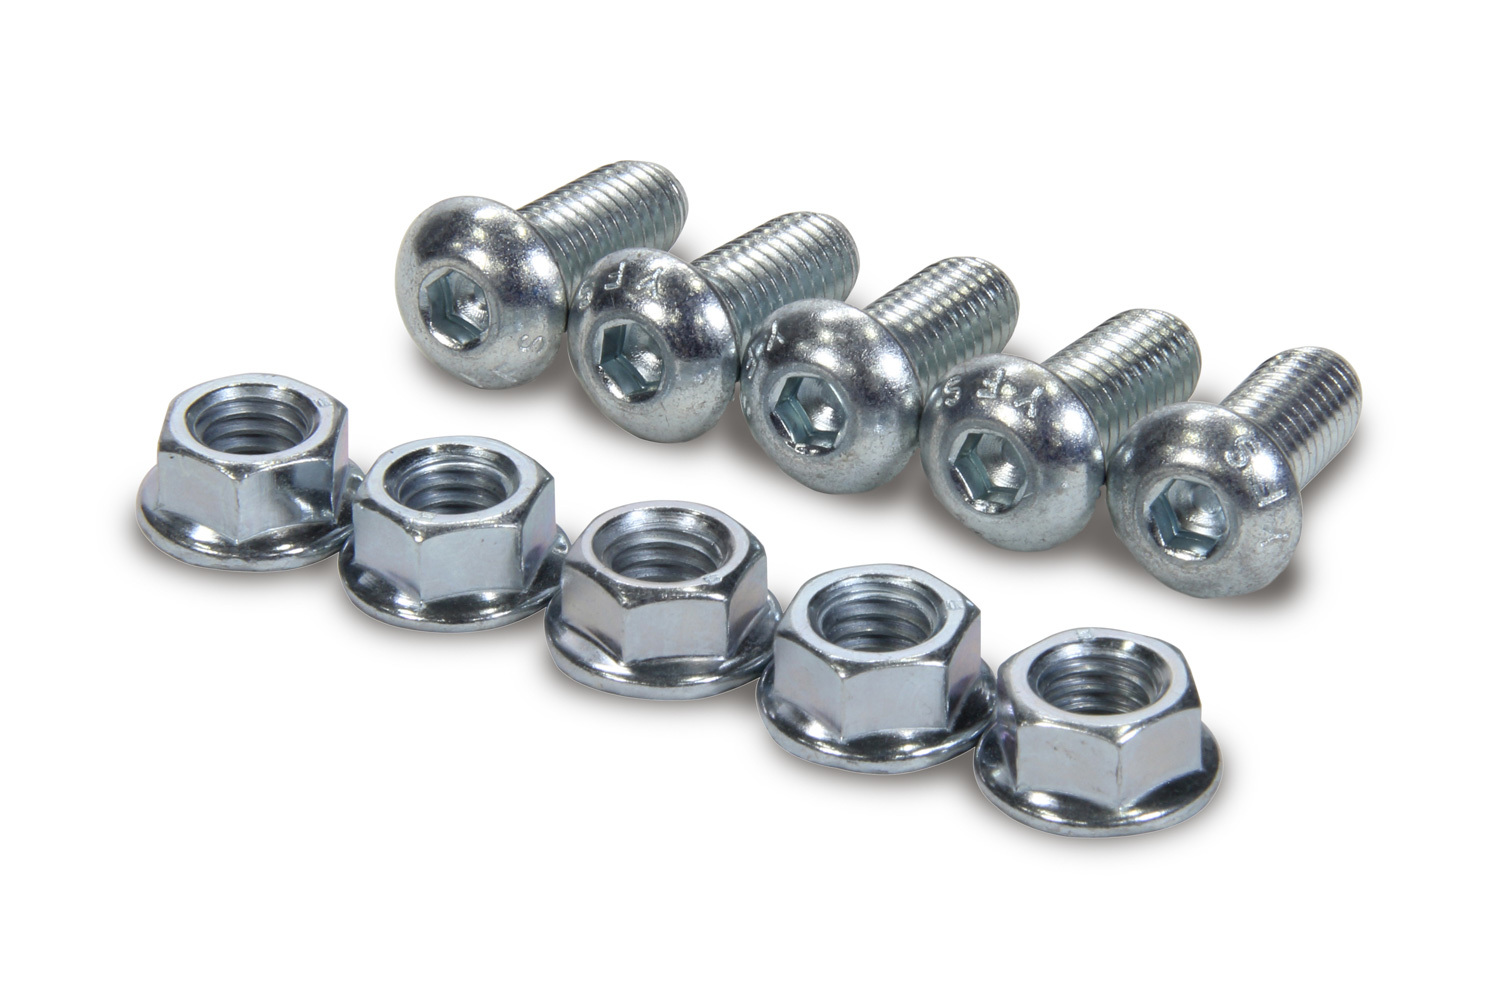 MPD Racing 28528 Bolt, 3/8-16 in Thread, 1 in Long, Allen Head, Nuts Included, Steel, Zinc Plated, Set of 5